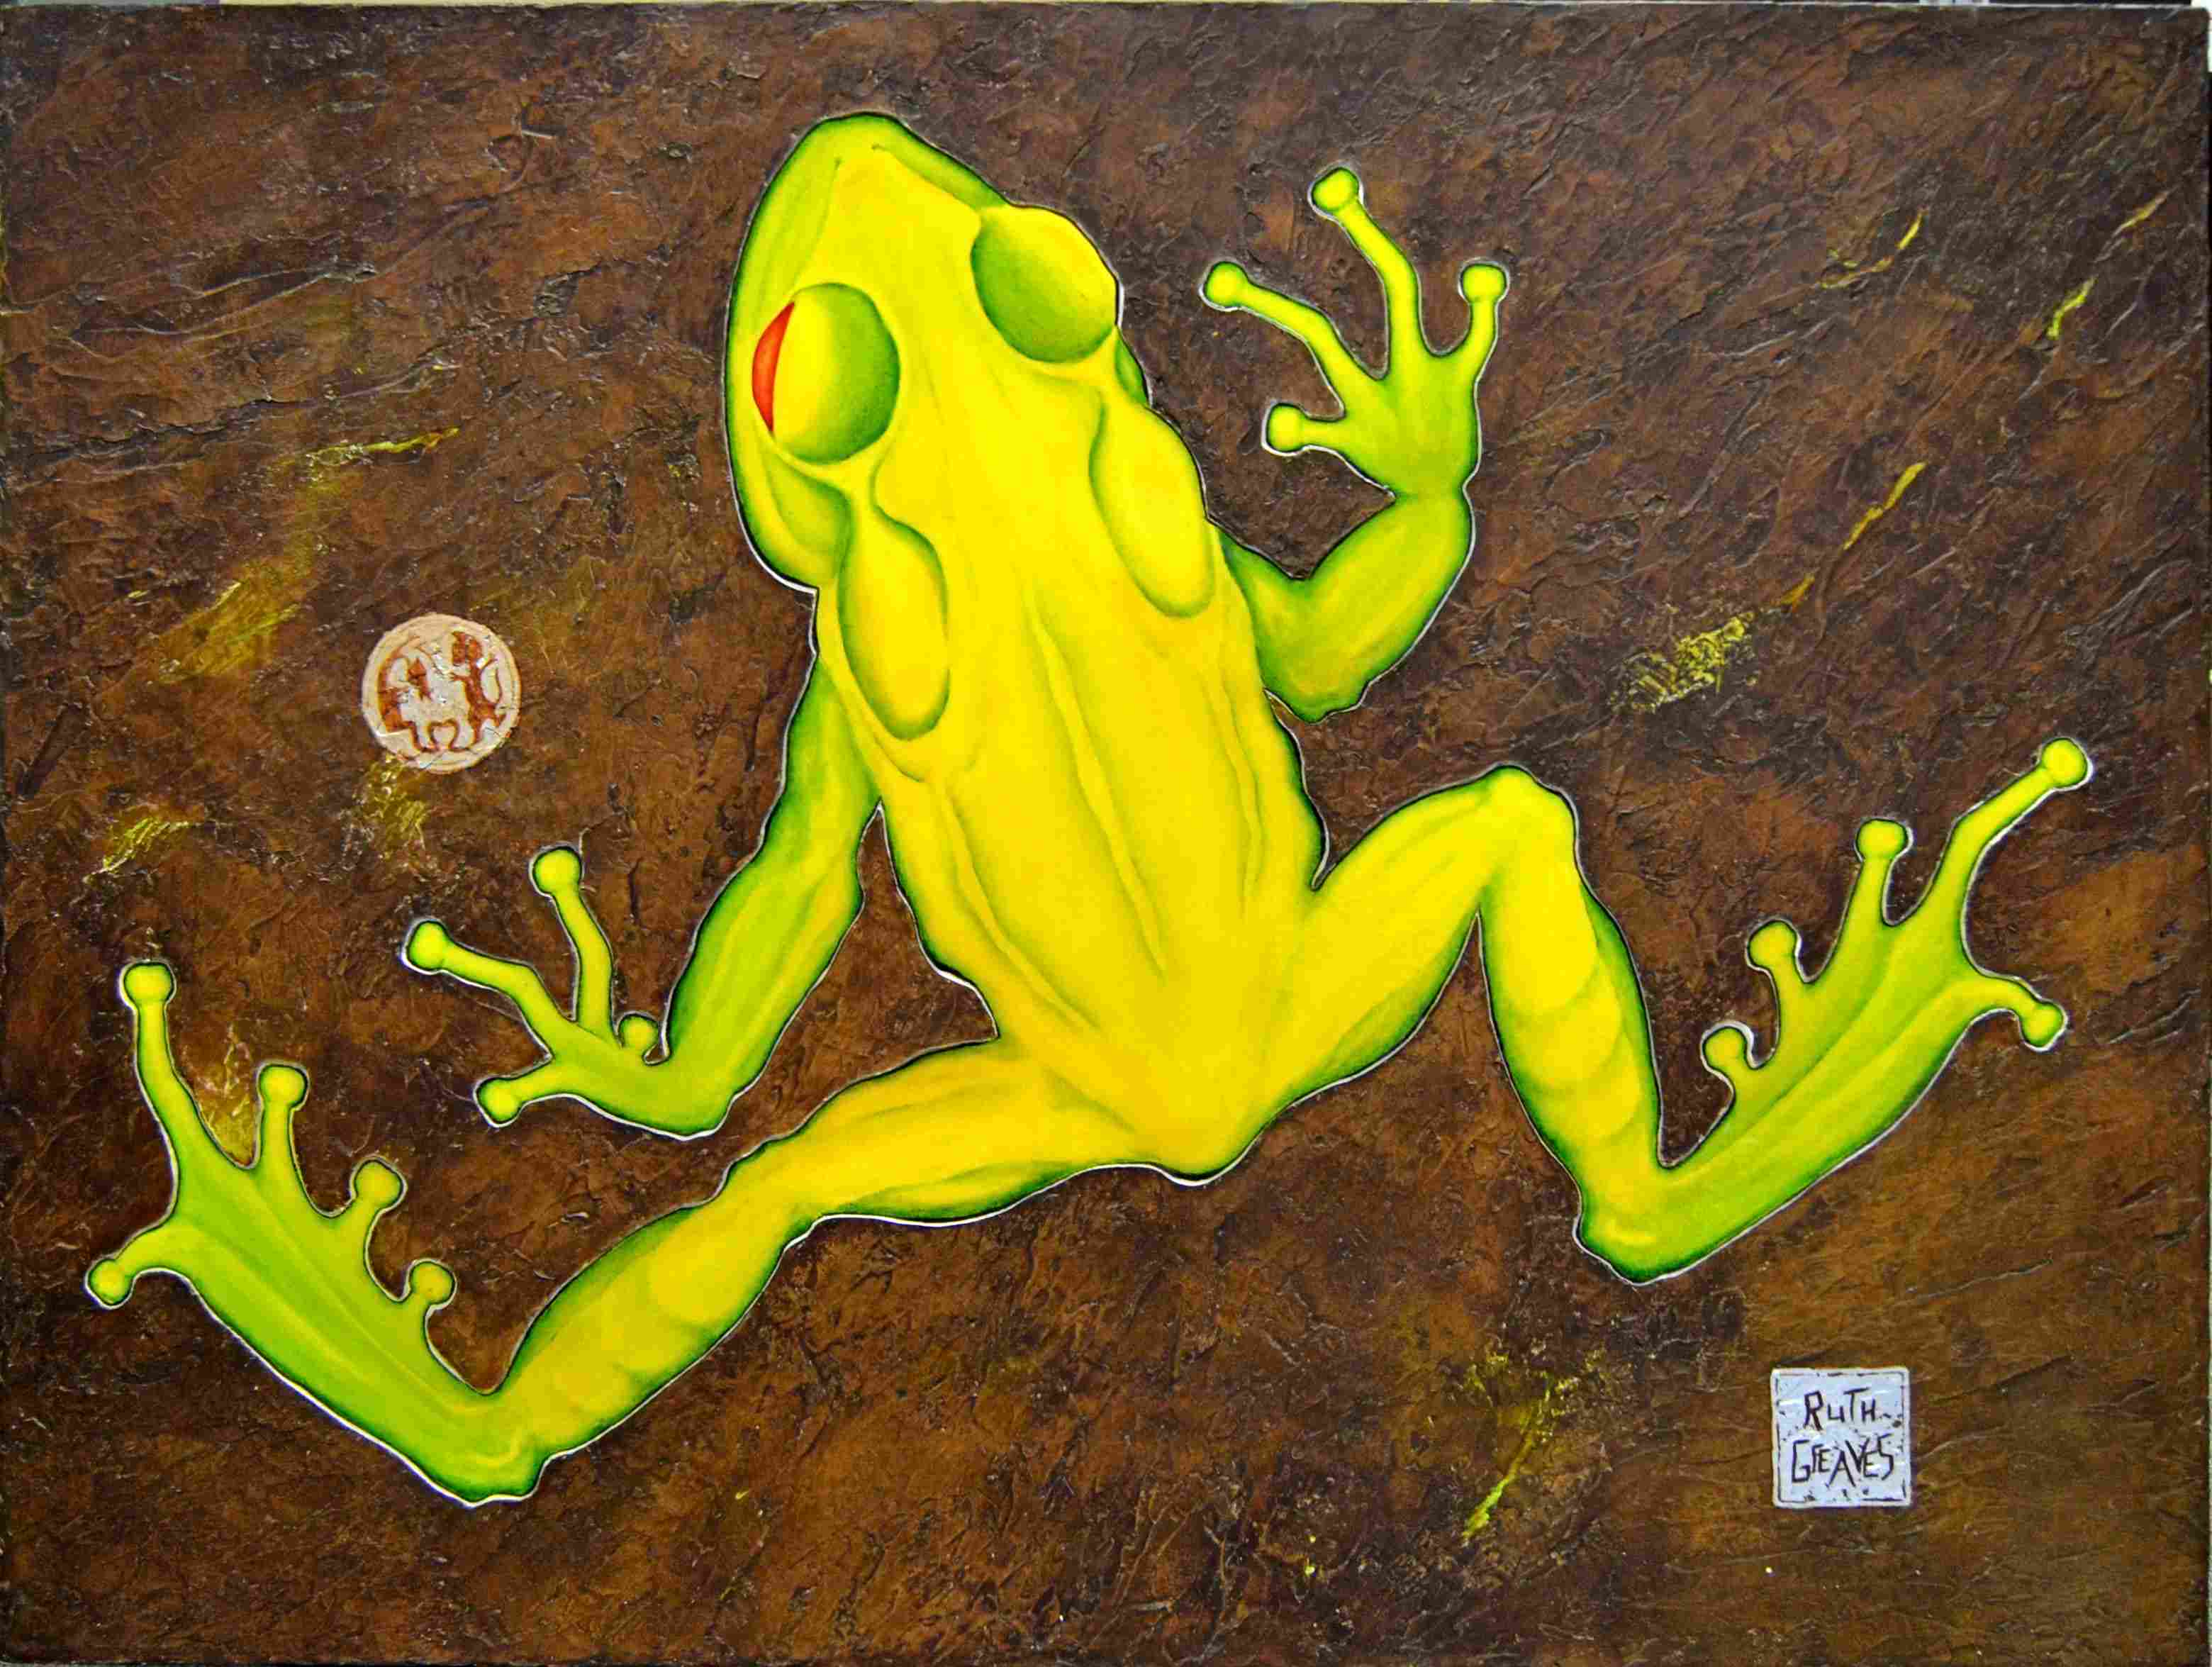 Ruth Greaves Stretched Green Frog signed; dated 2009 and inscribed with the title on the stretcher